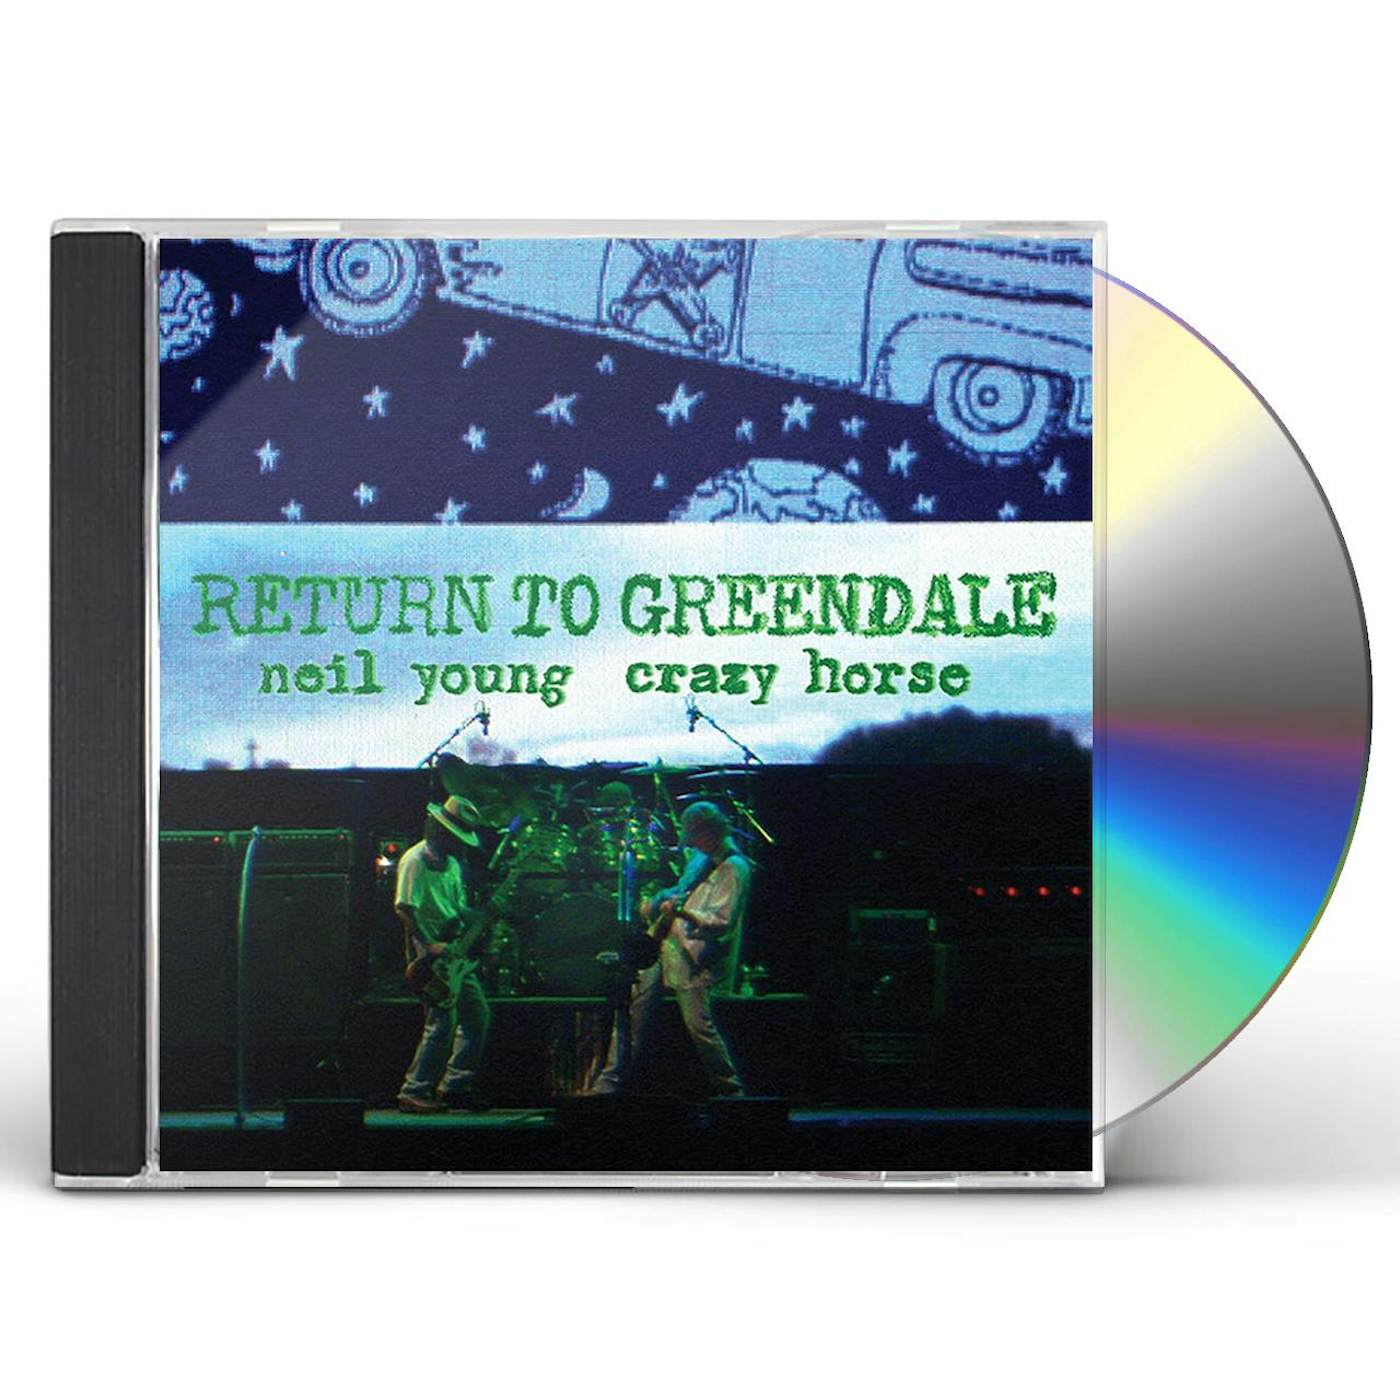 Neil Young & Crazy Horse RETURN TO GREENDALE CD